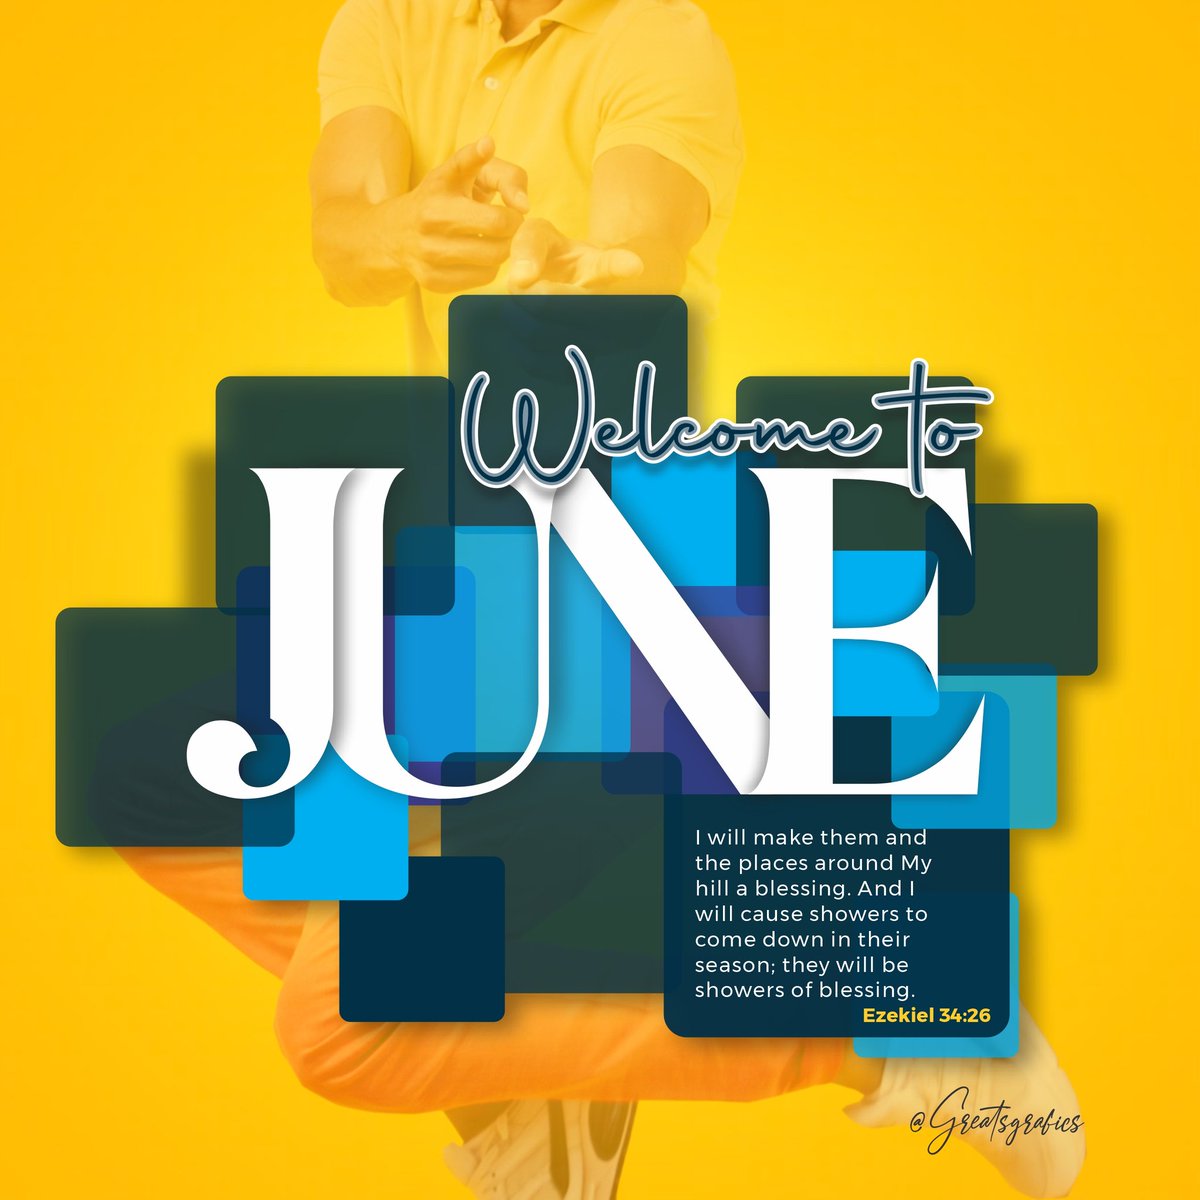 There's this special feeling about June.
IT IS A BLESSED MONTH.
#newmonth #FiverrGig #GraphicDesigner #HappyNewMonth #designinspiration #imadeit